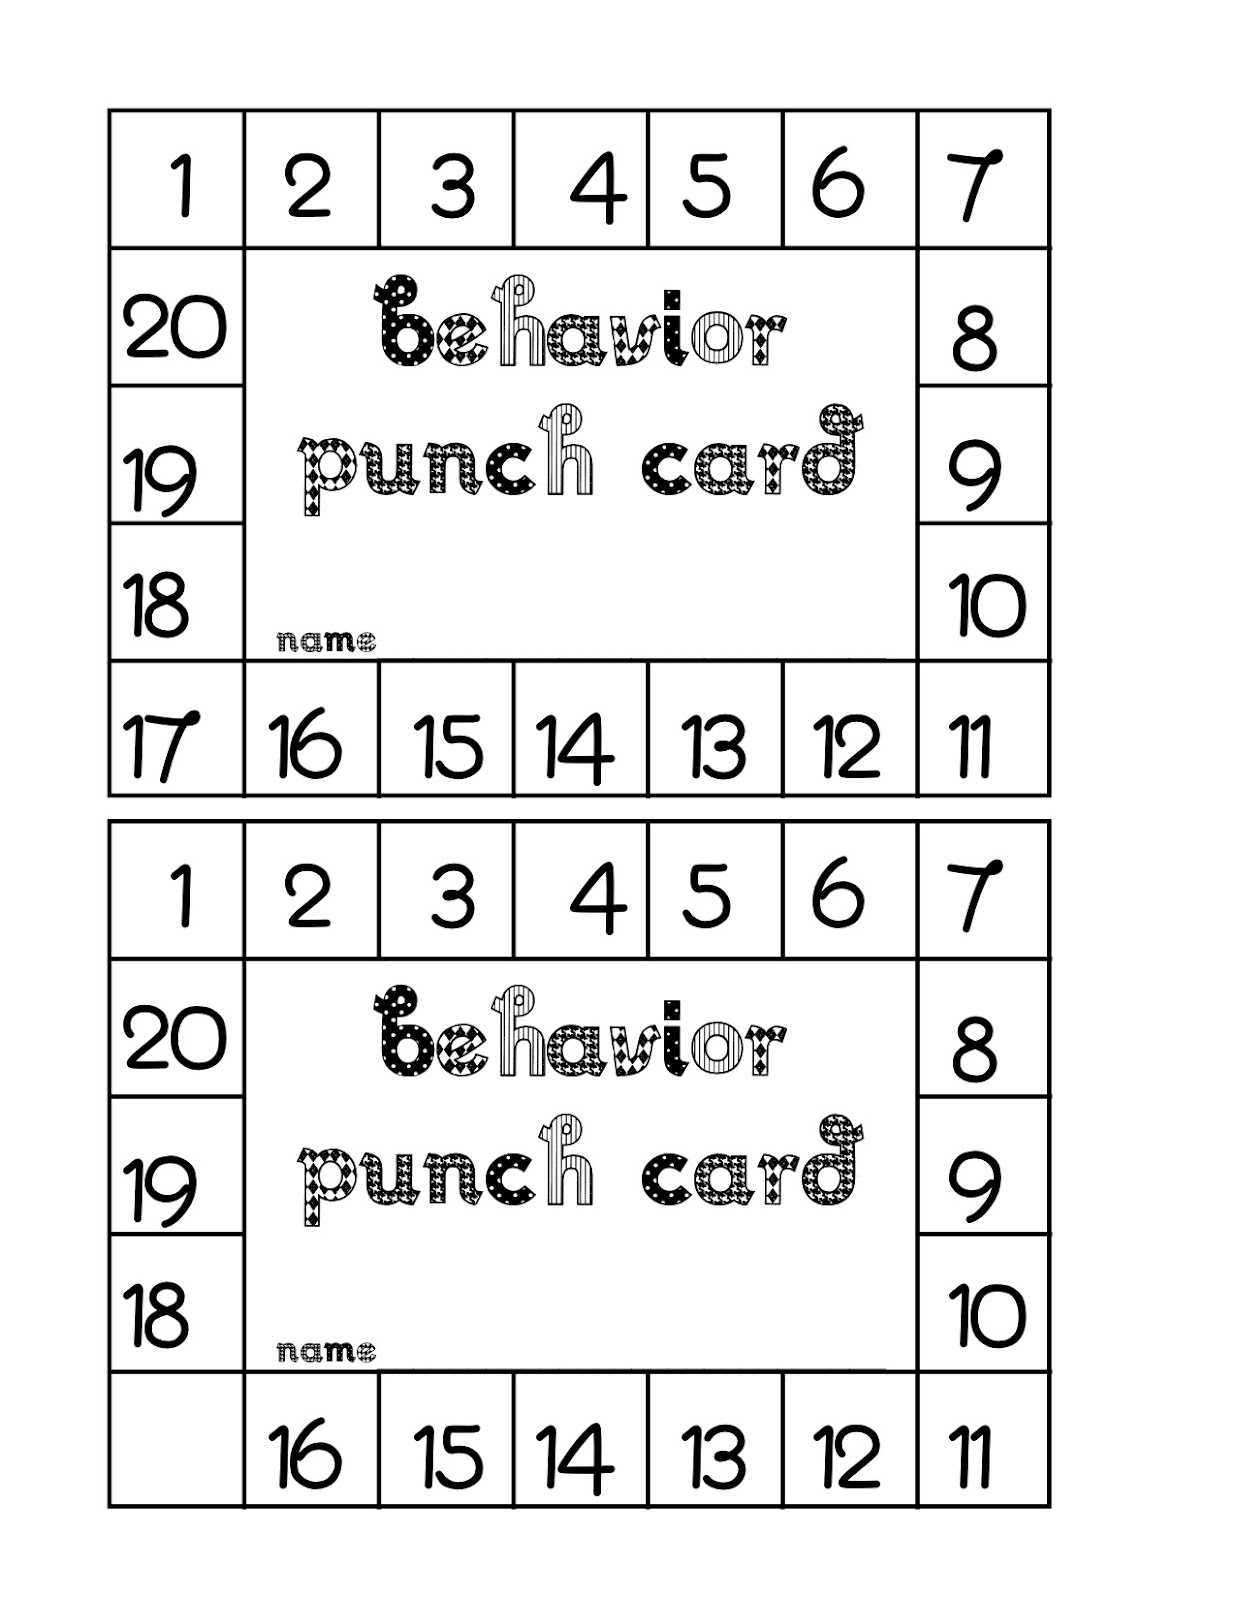 Punch Card Template Free ] – Free Printable Punch Card Inside Reward Punch Card Template